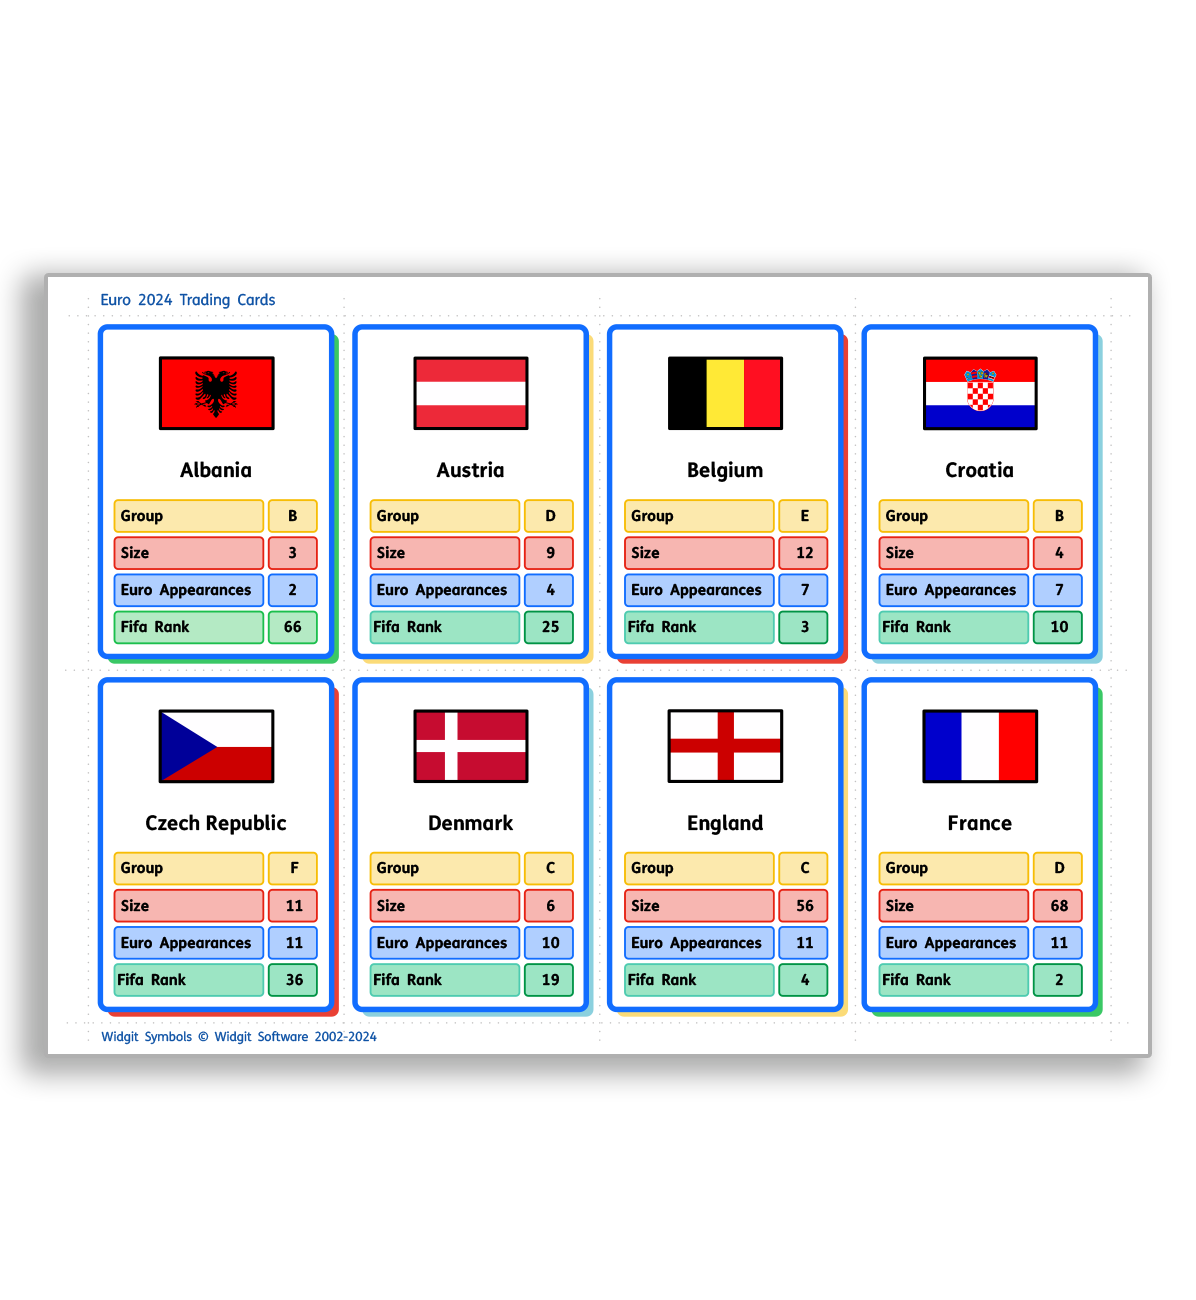 EURO 2024 Trading Cards